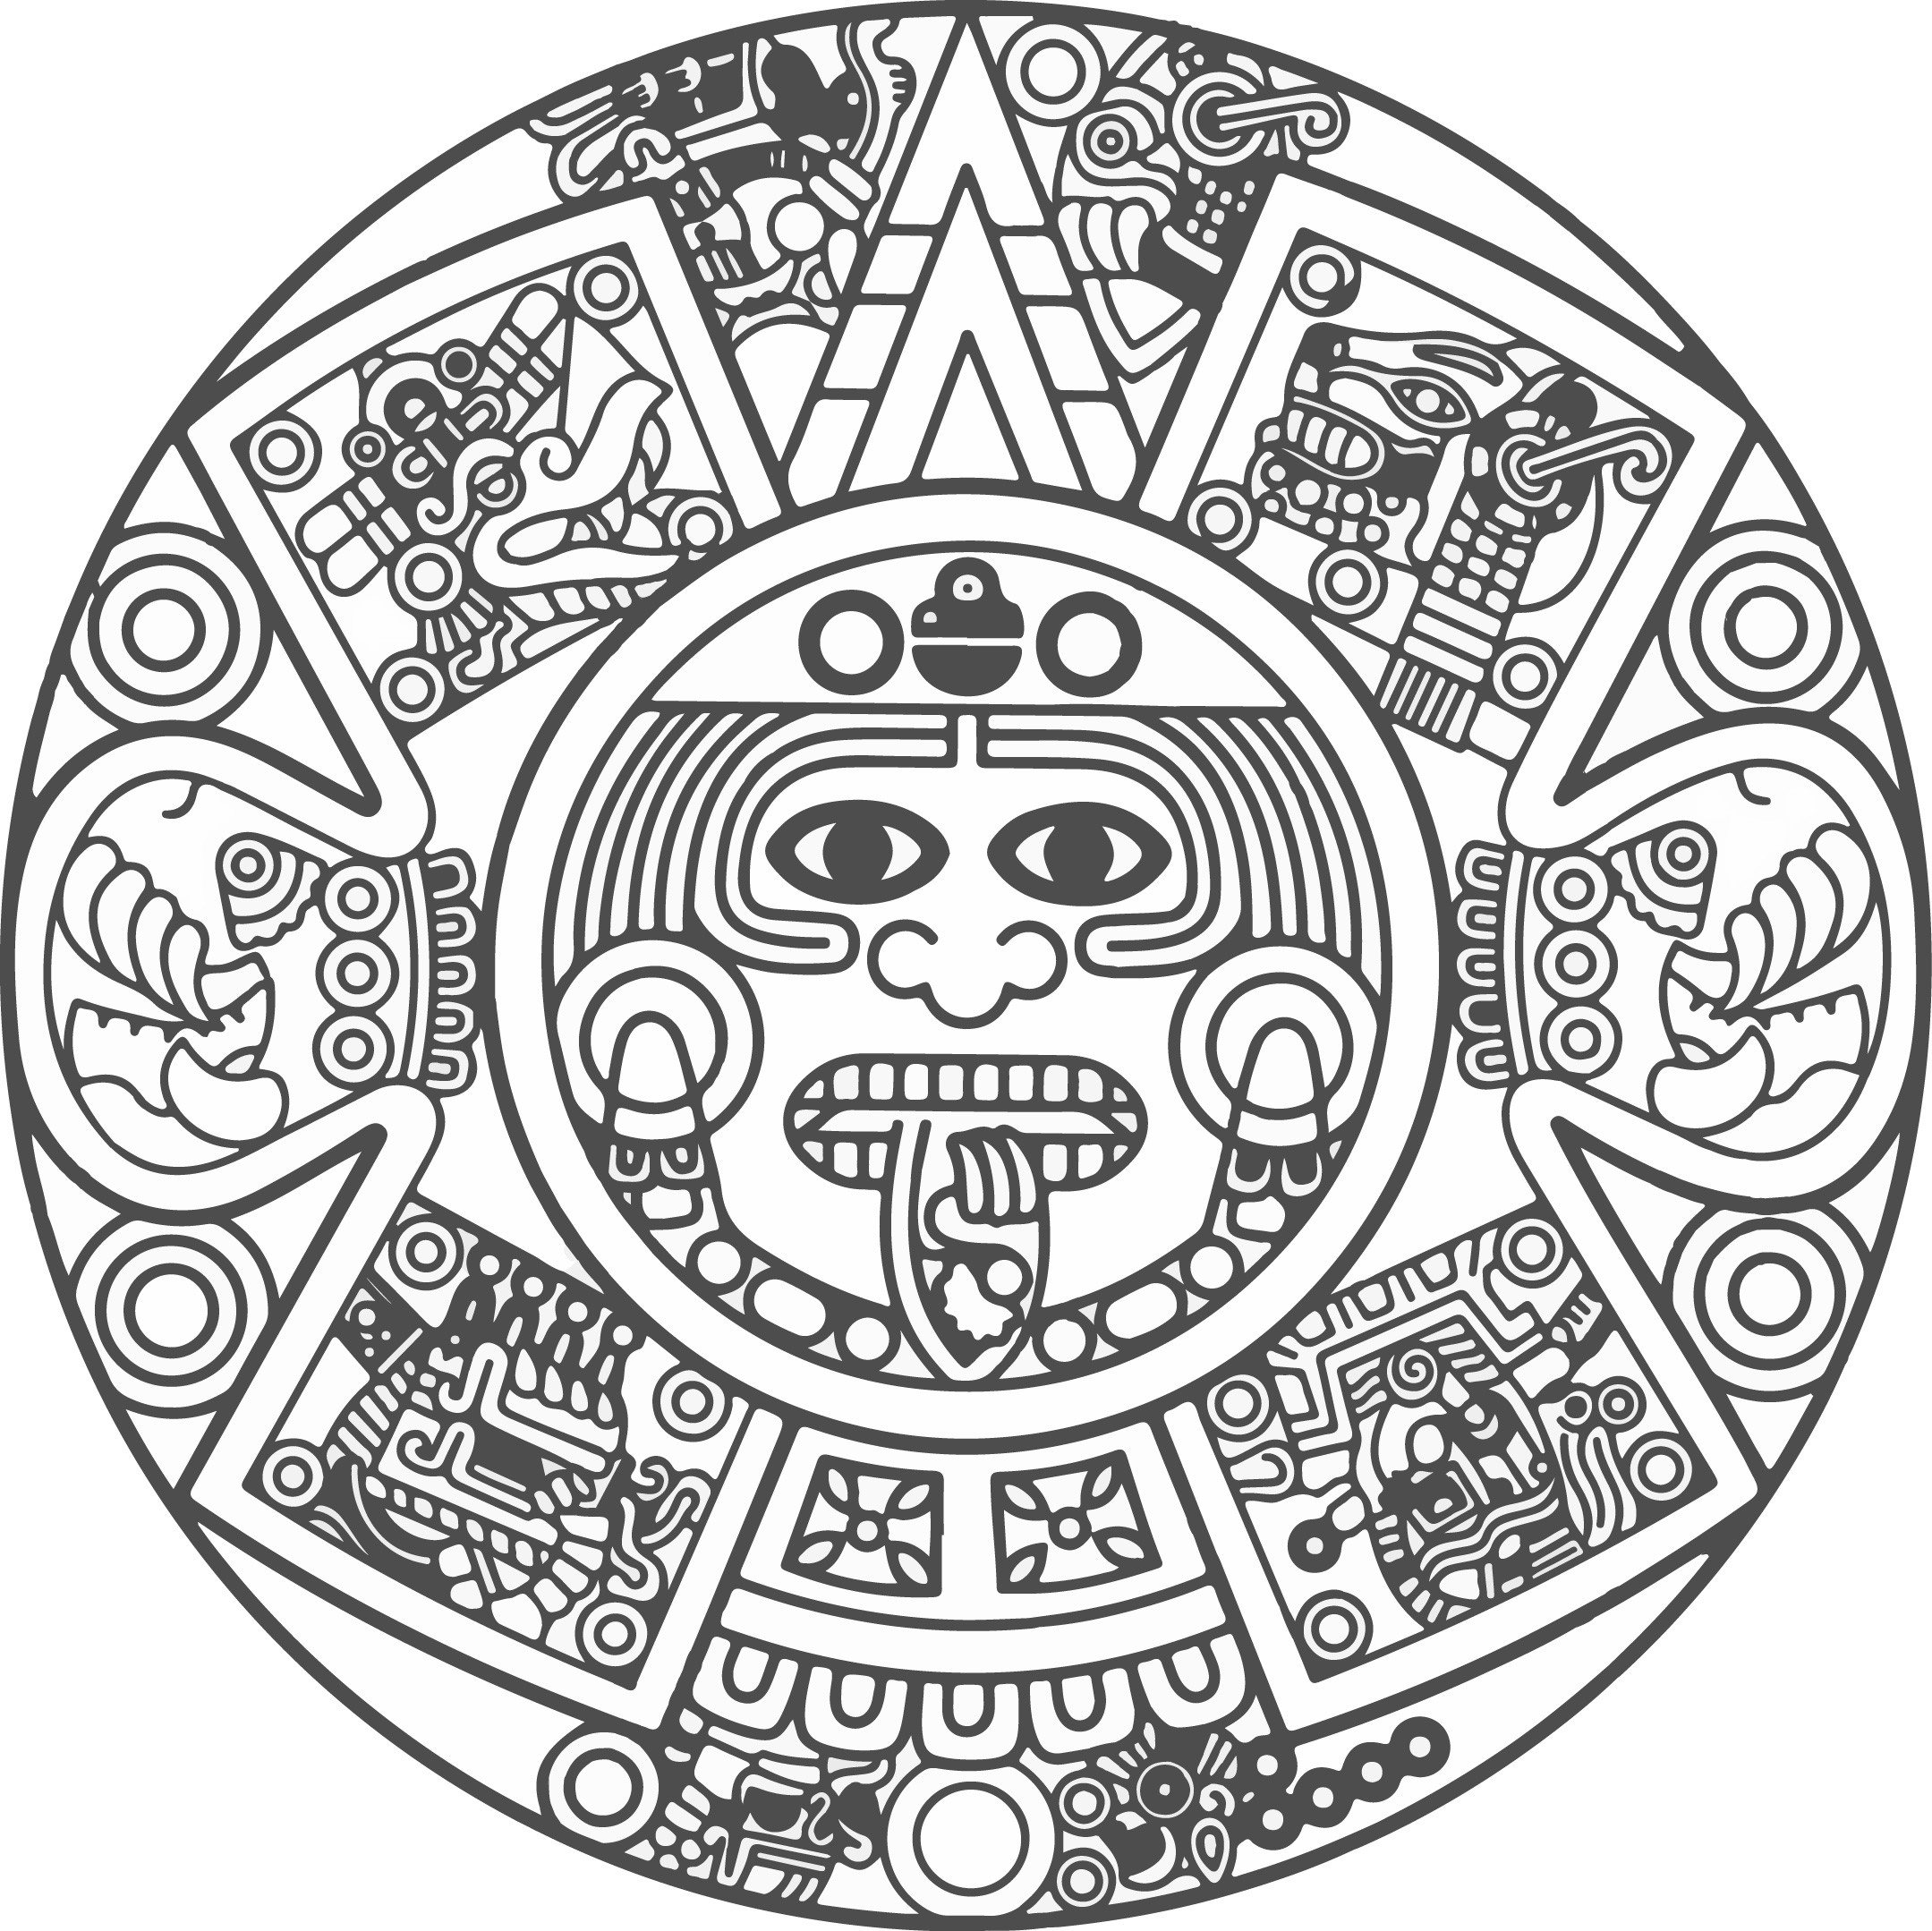 Aztec Calendar Coloring Page At Getcolorings | Free